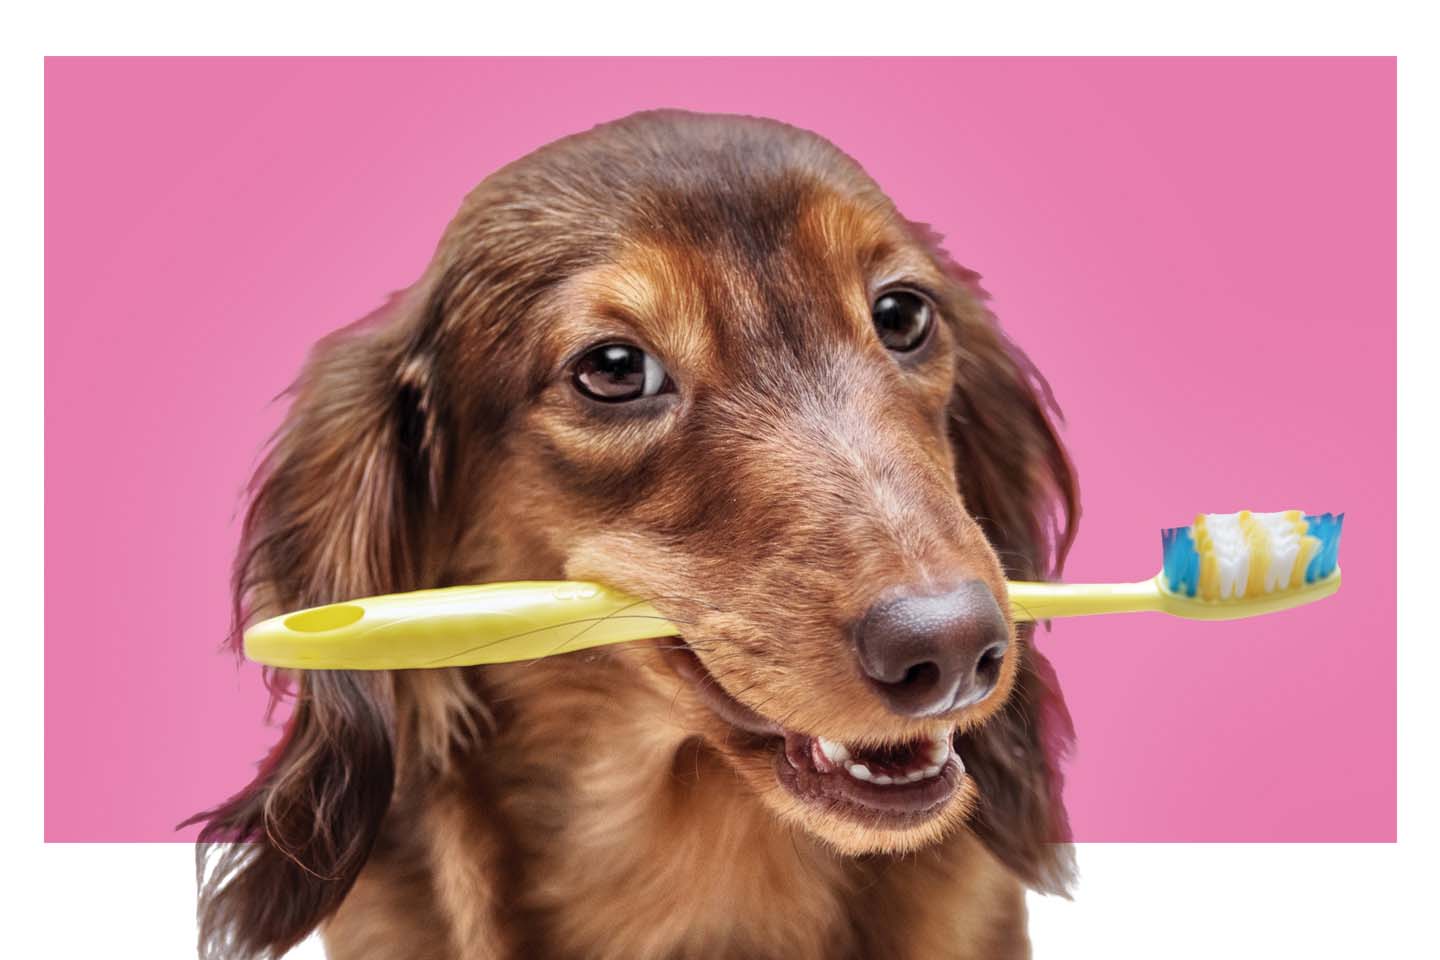 Brown puppy dog holding a toothbrush in mouth on pink background